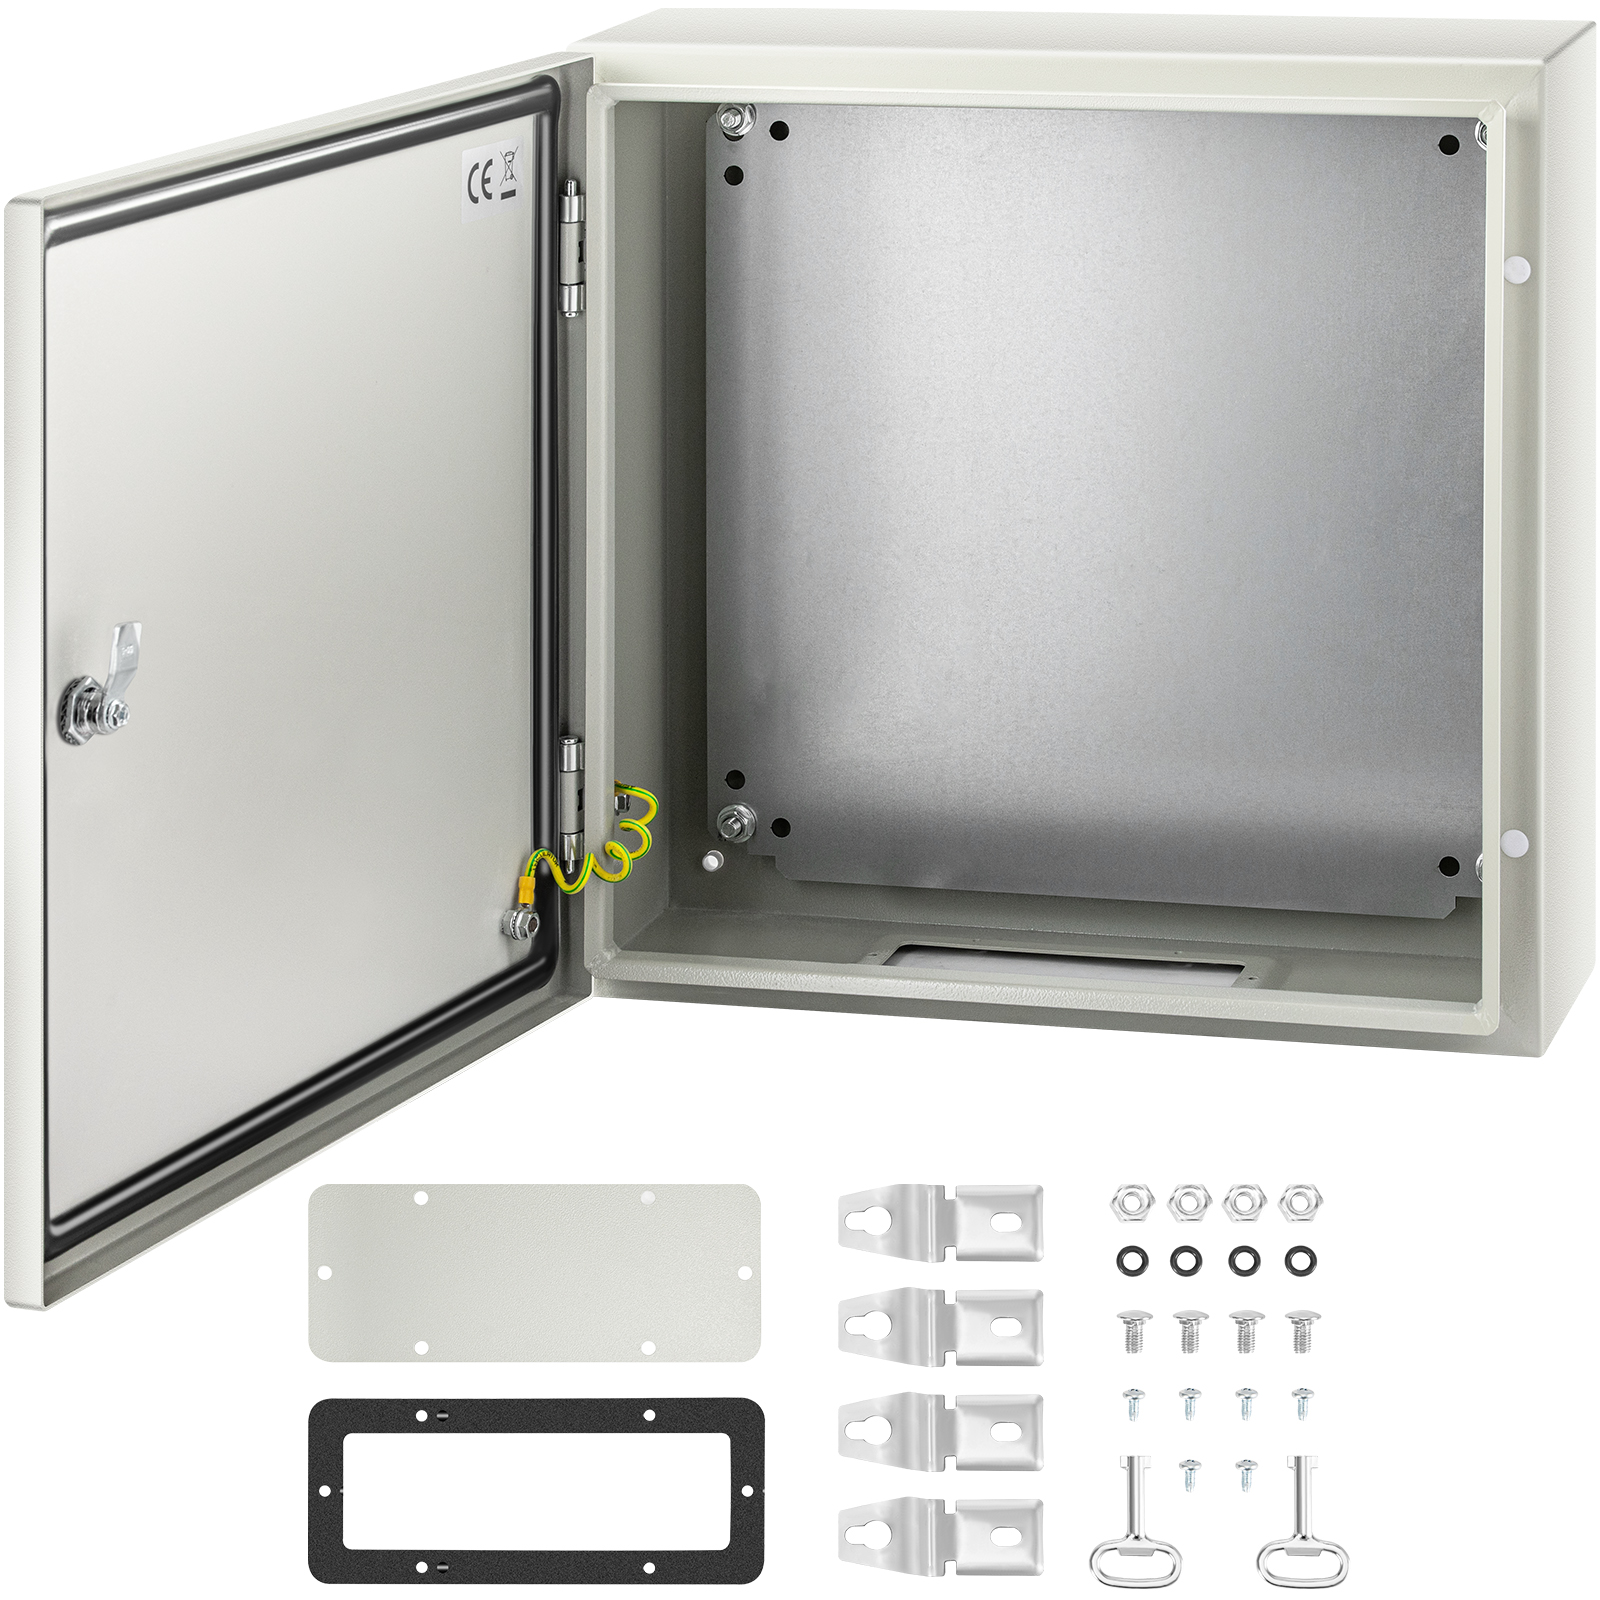 Carbon Steel Electrical Enclosure Box IP65 Wall Mount 400 x 300 x 200 mm -  Grey - Furniture > Home Furniture